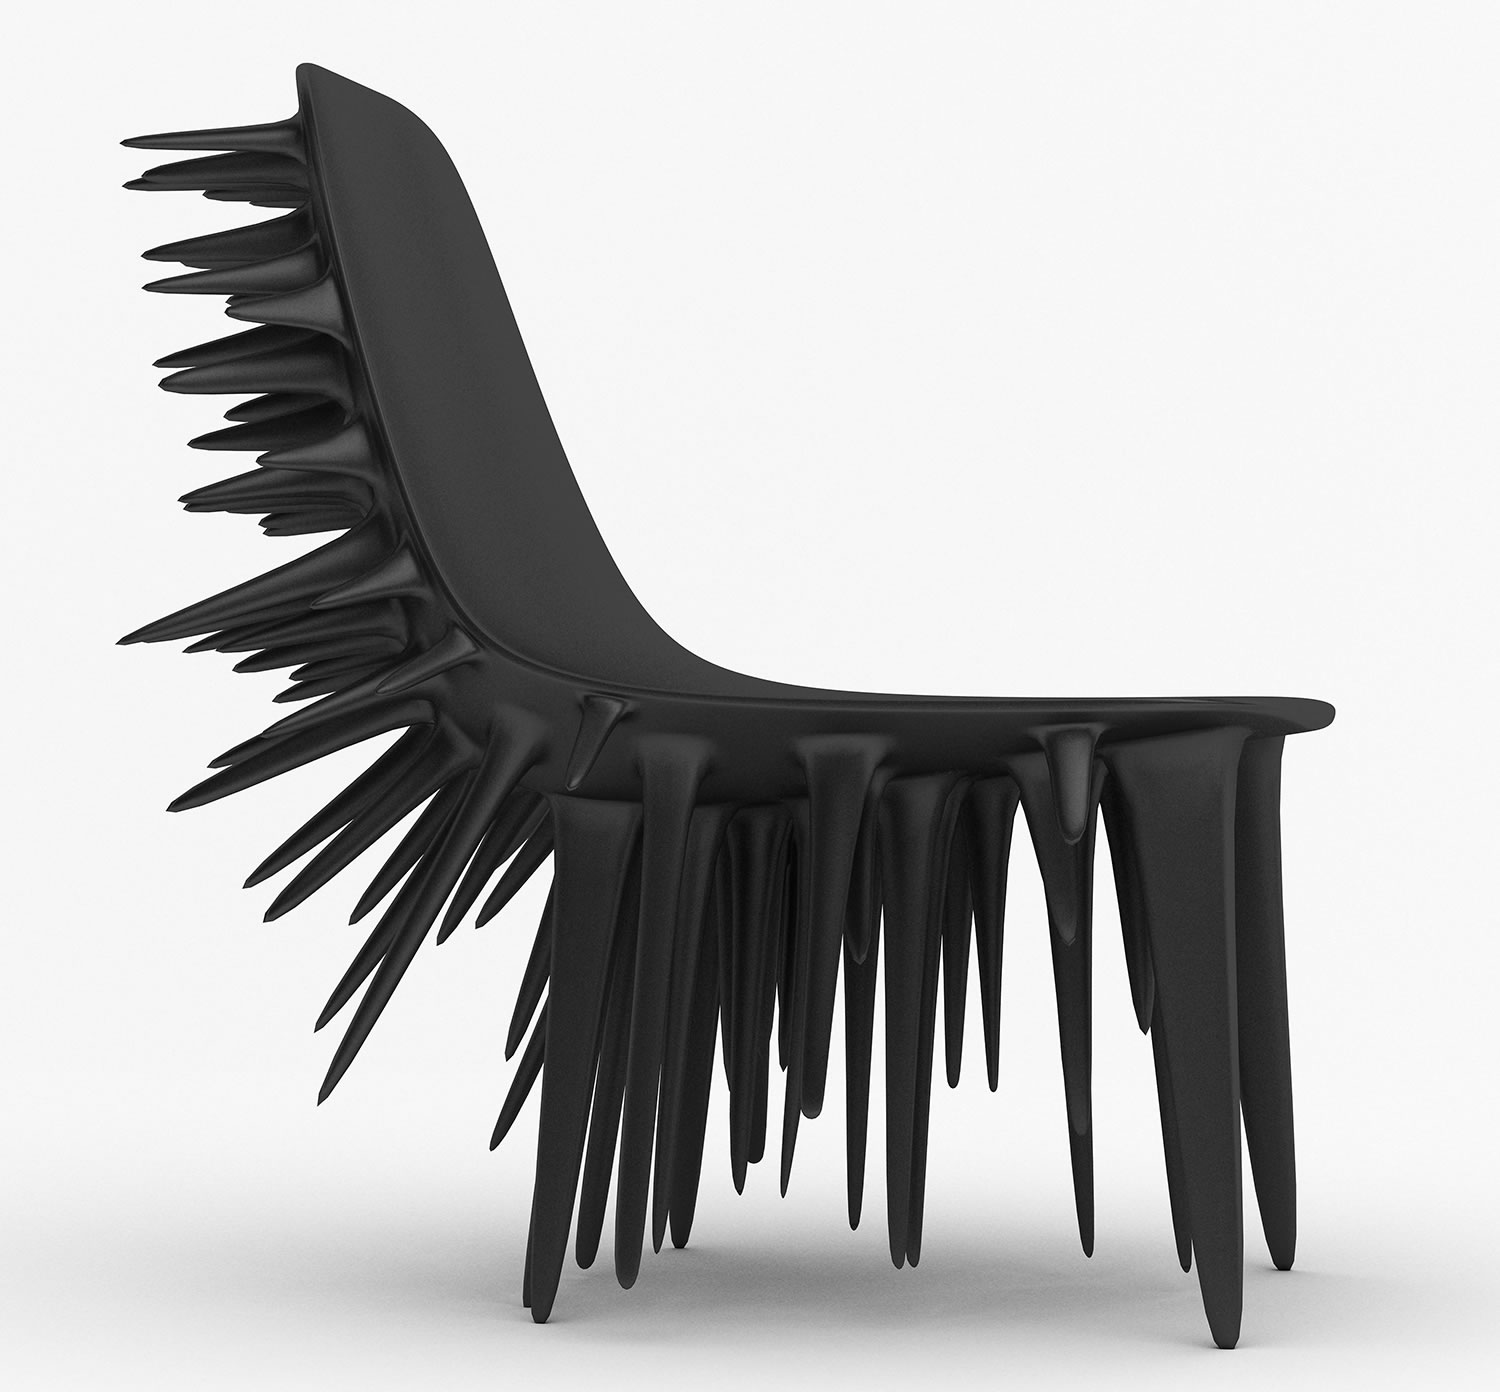 Ali Alavi’s "Icicle Chair" is a fascinating item to have in a modern office. 